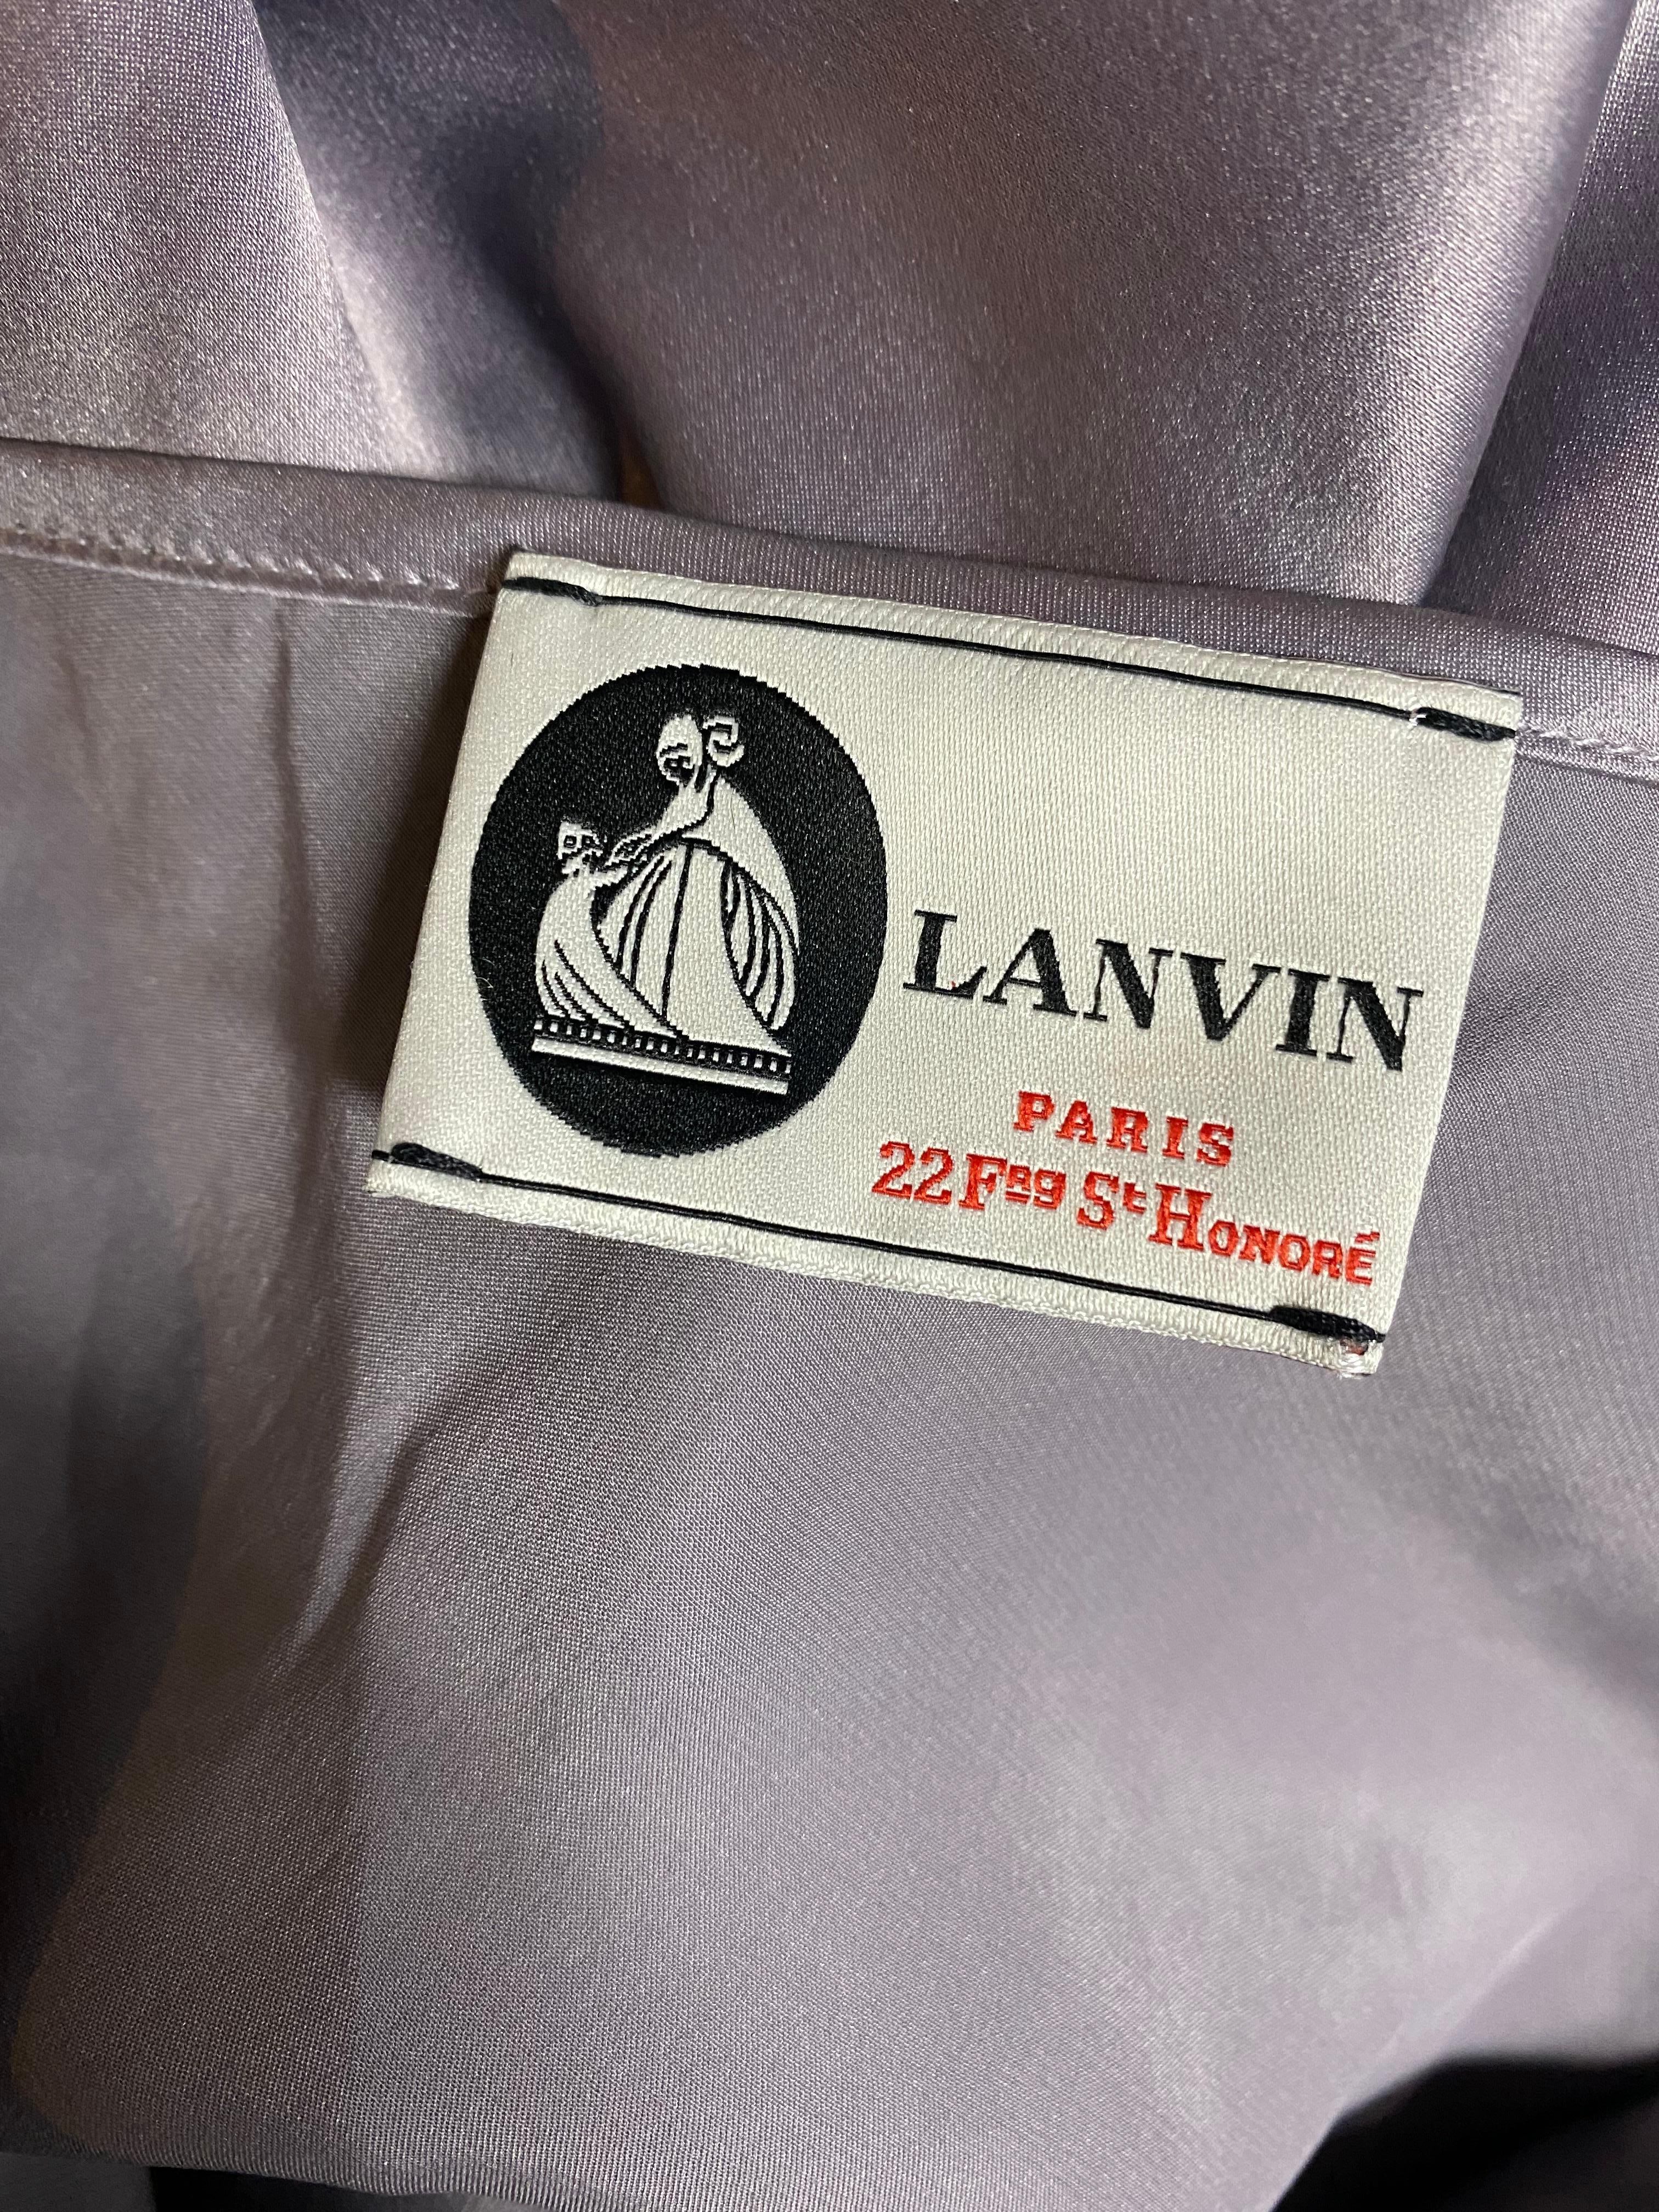 Vintage Lanvin Silk Top Blouse, Size 44 In Excellent Condition For Sale In Beverly Hills, CA